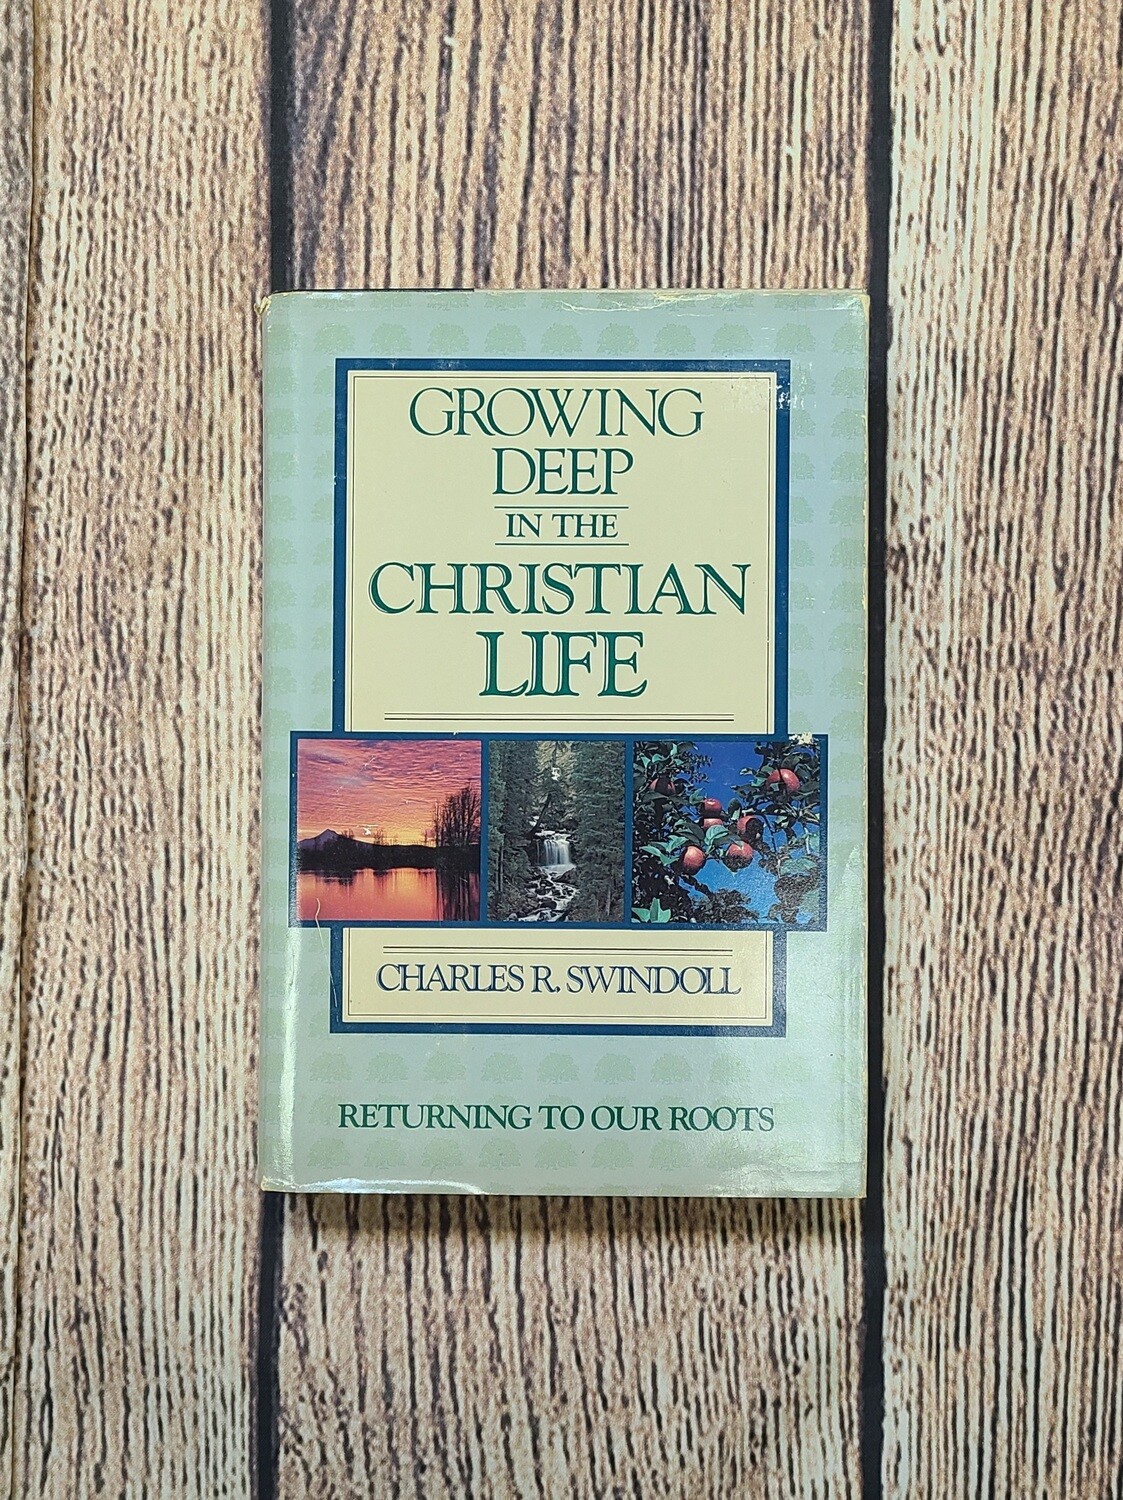 Growing Deep in the Christian Life by Charles R. Swindoll